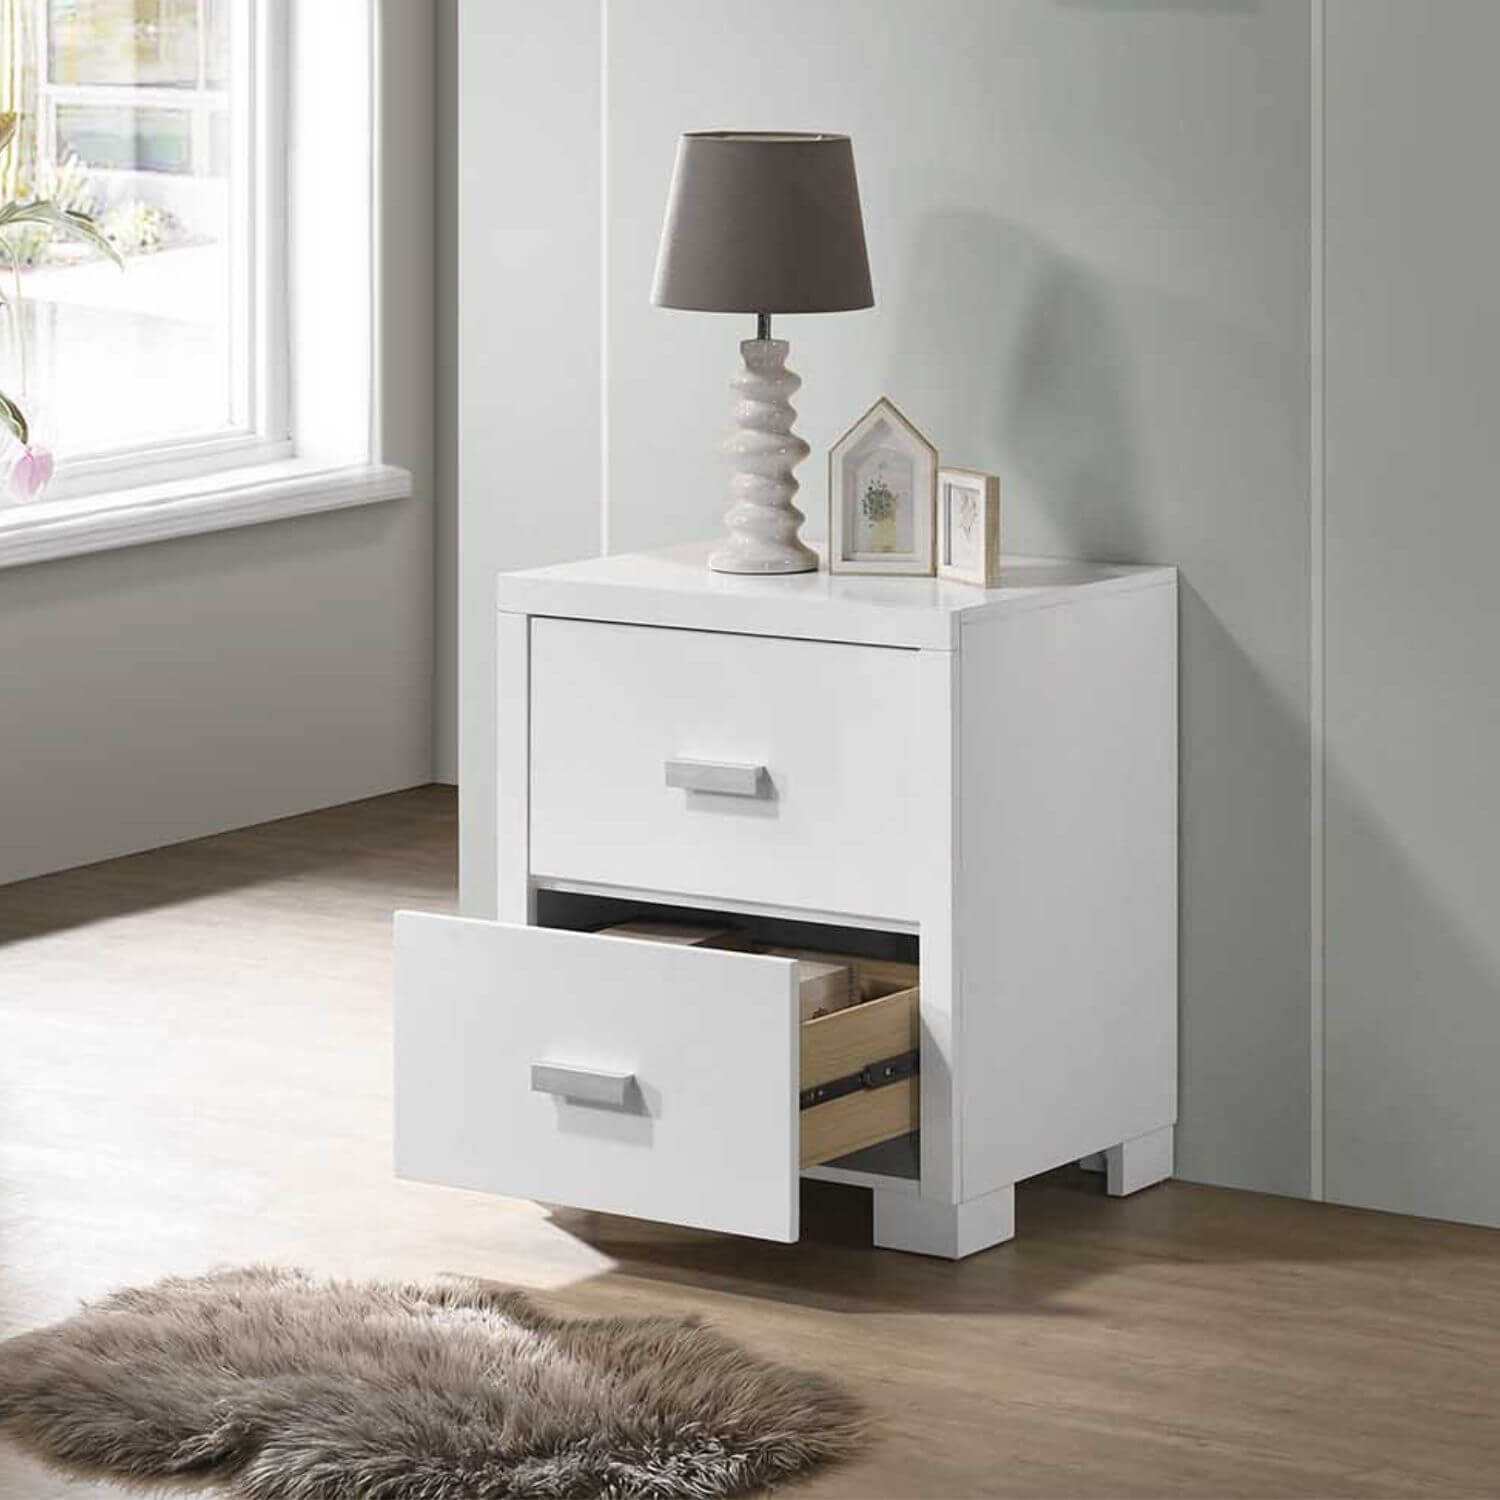 Orbelle Nightstand White - Lifestyle